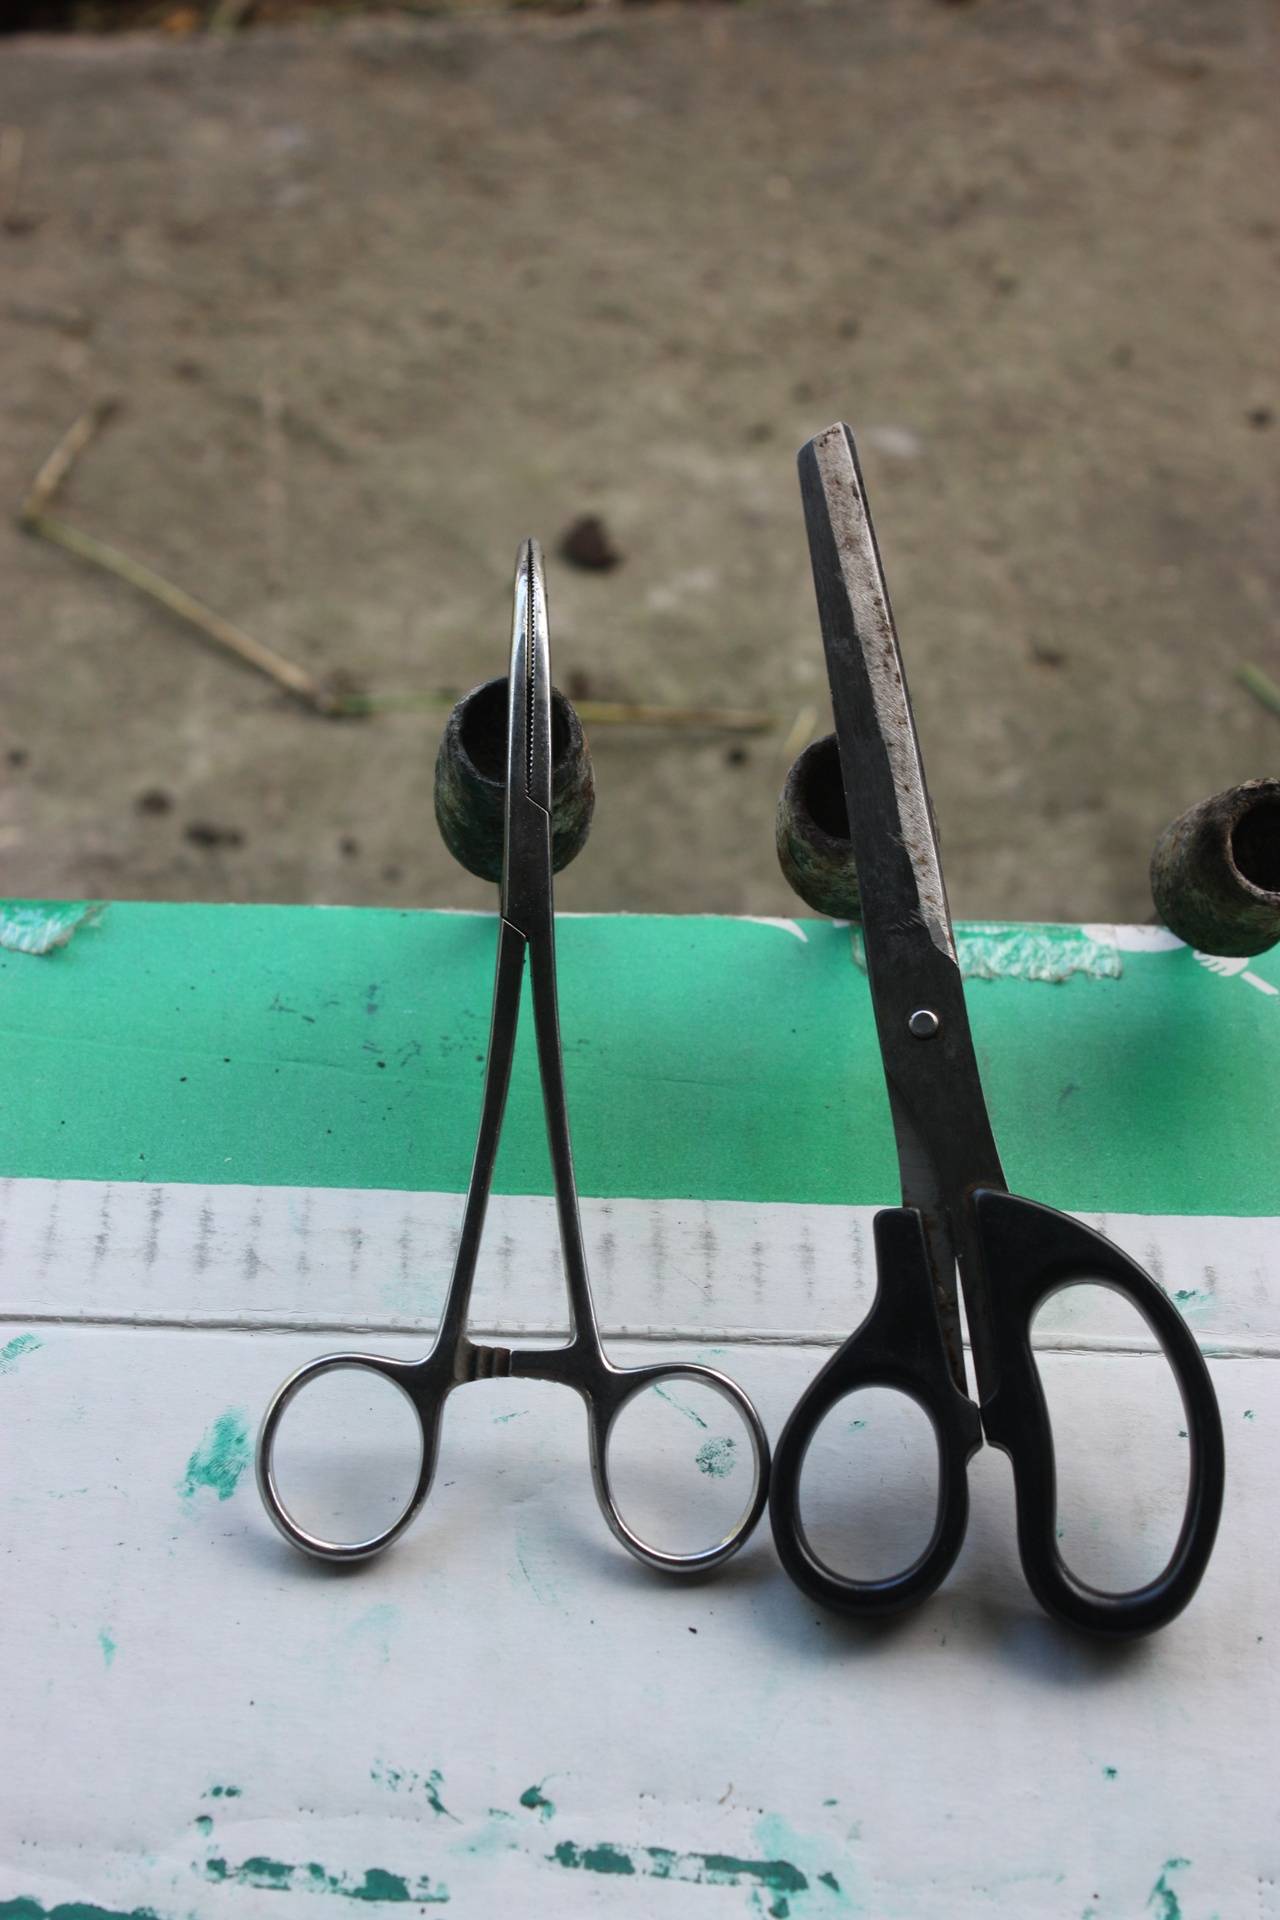 Scissors and Forcep